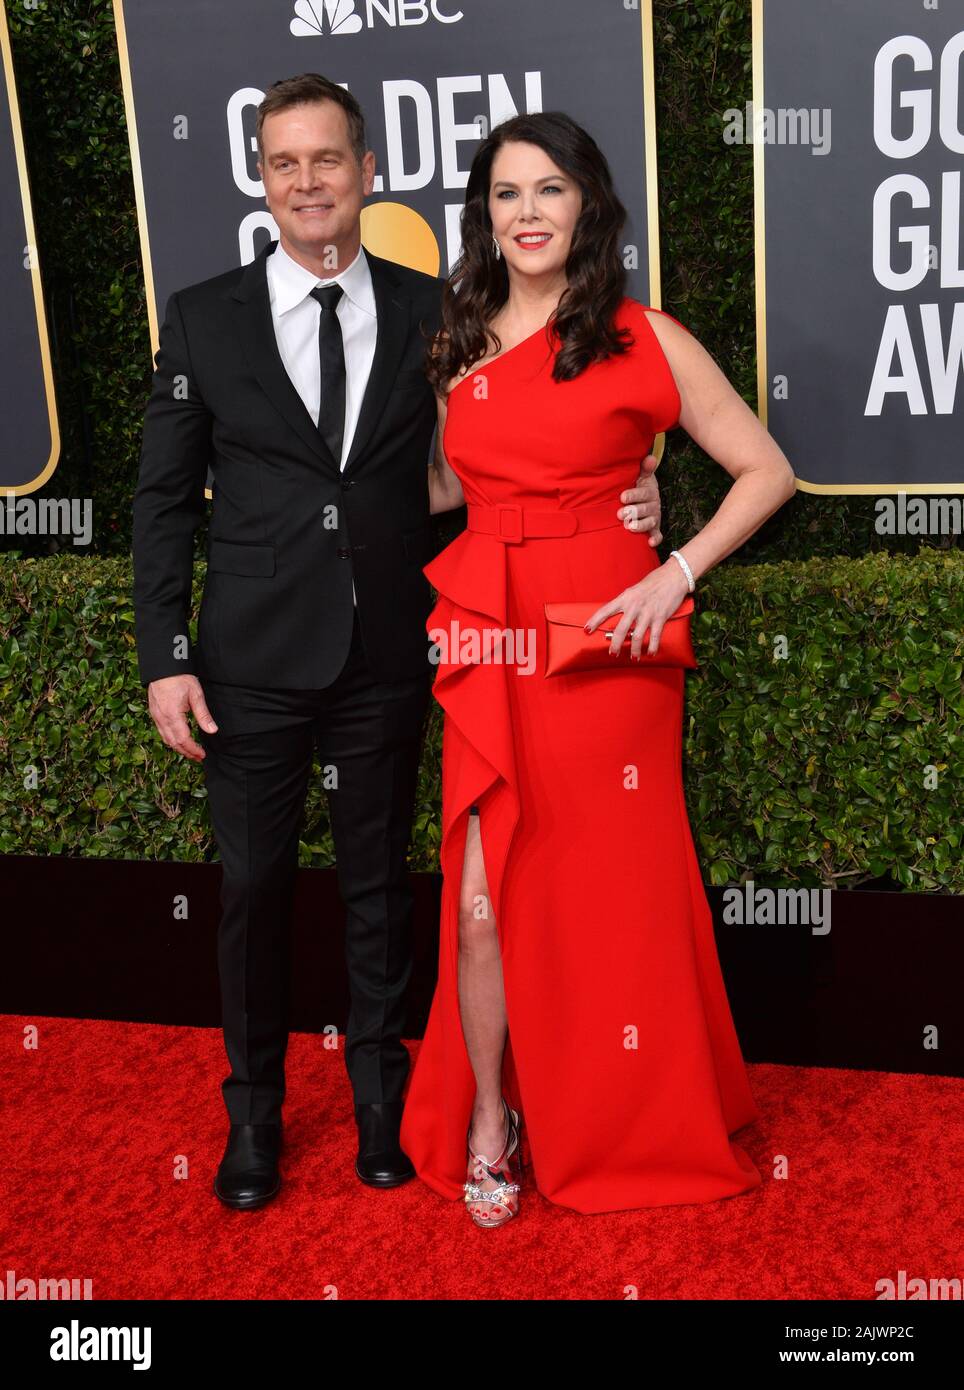 Los Angeles, California, USA. 05th Jan, 2020. Lauren Graham & Peter Krause arriving at the 2020 Golden Globe Awards at the Beverly Hilton Hotel. Picture: Paul Smith/Featureflash Credit: Paul Smith/Alamy Live News Stock Photo